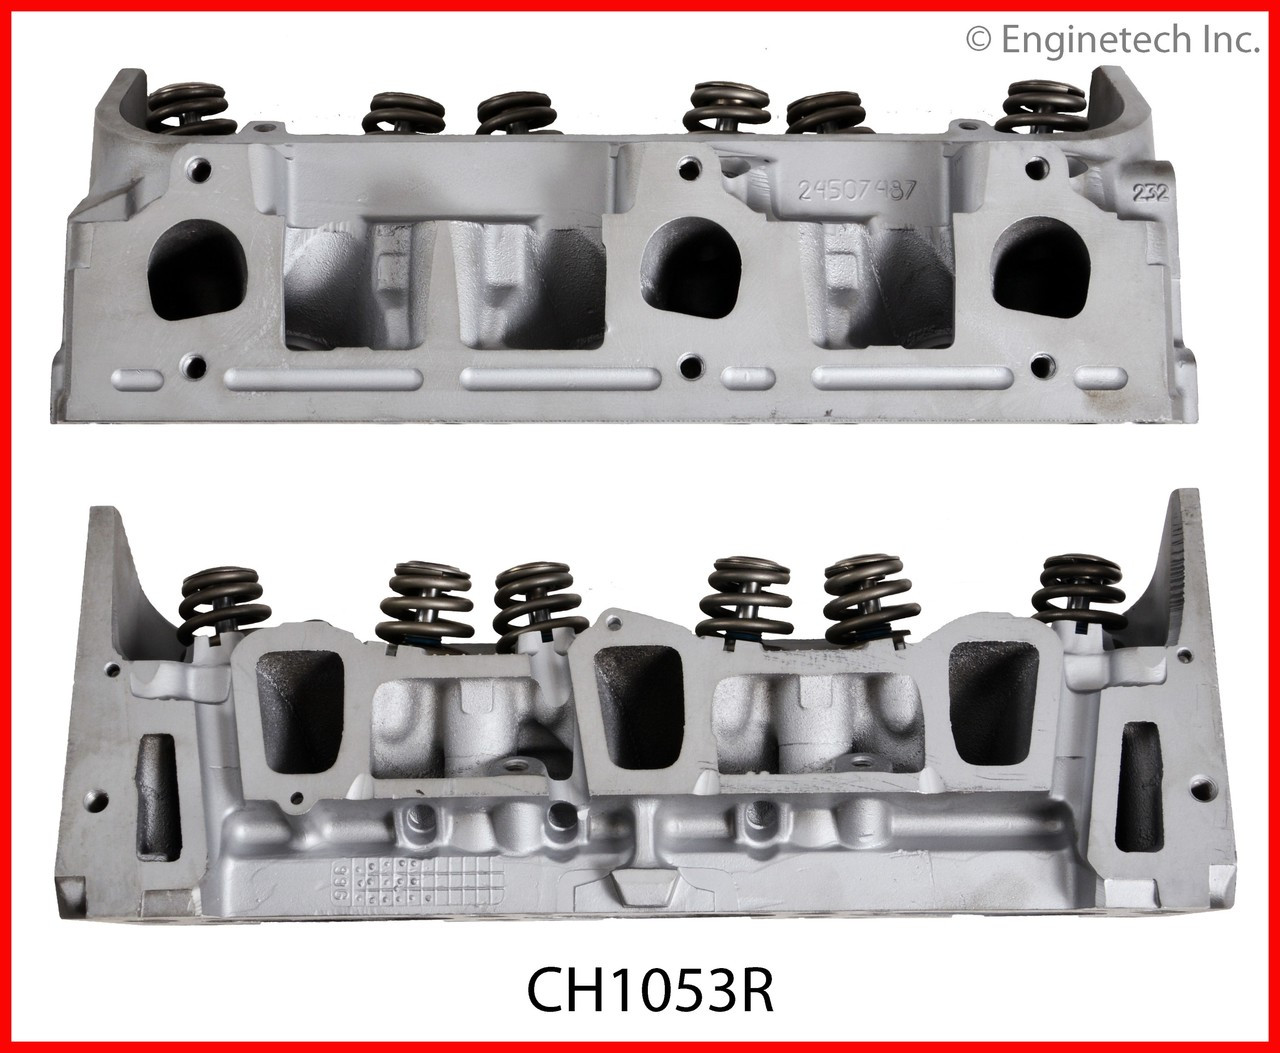 2001 Chevrolet Venture 3.4L Engine Cylinder Head Assembly CH1053R -18